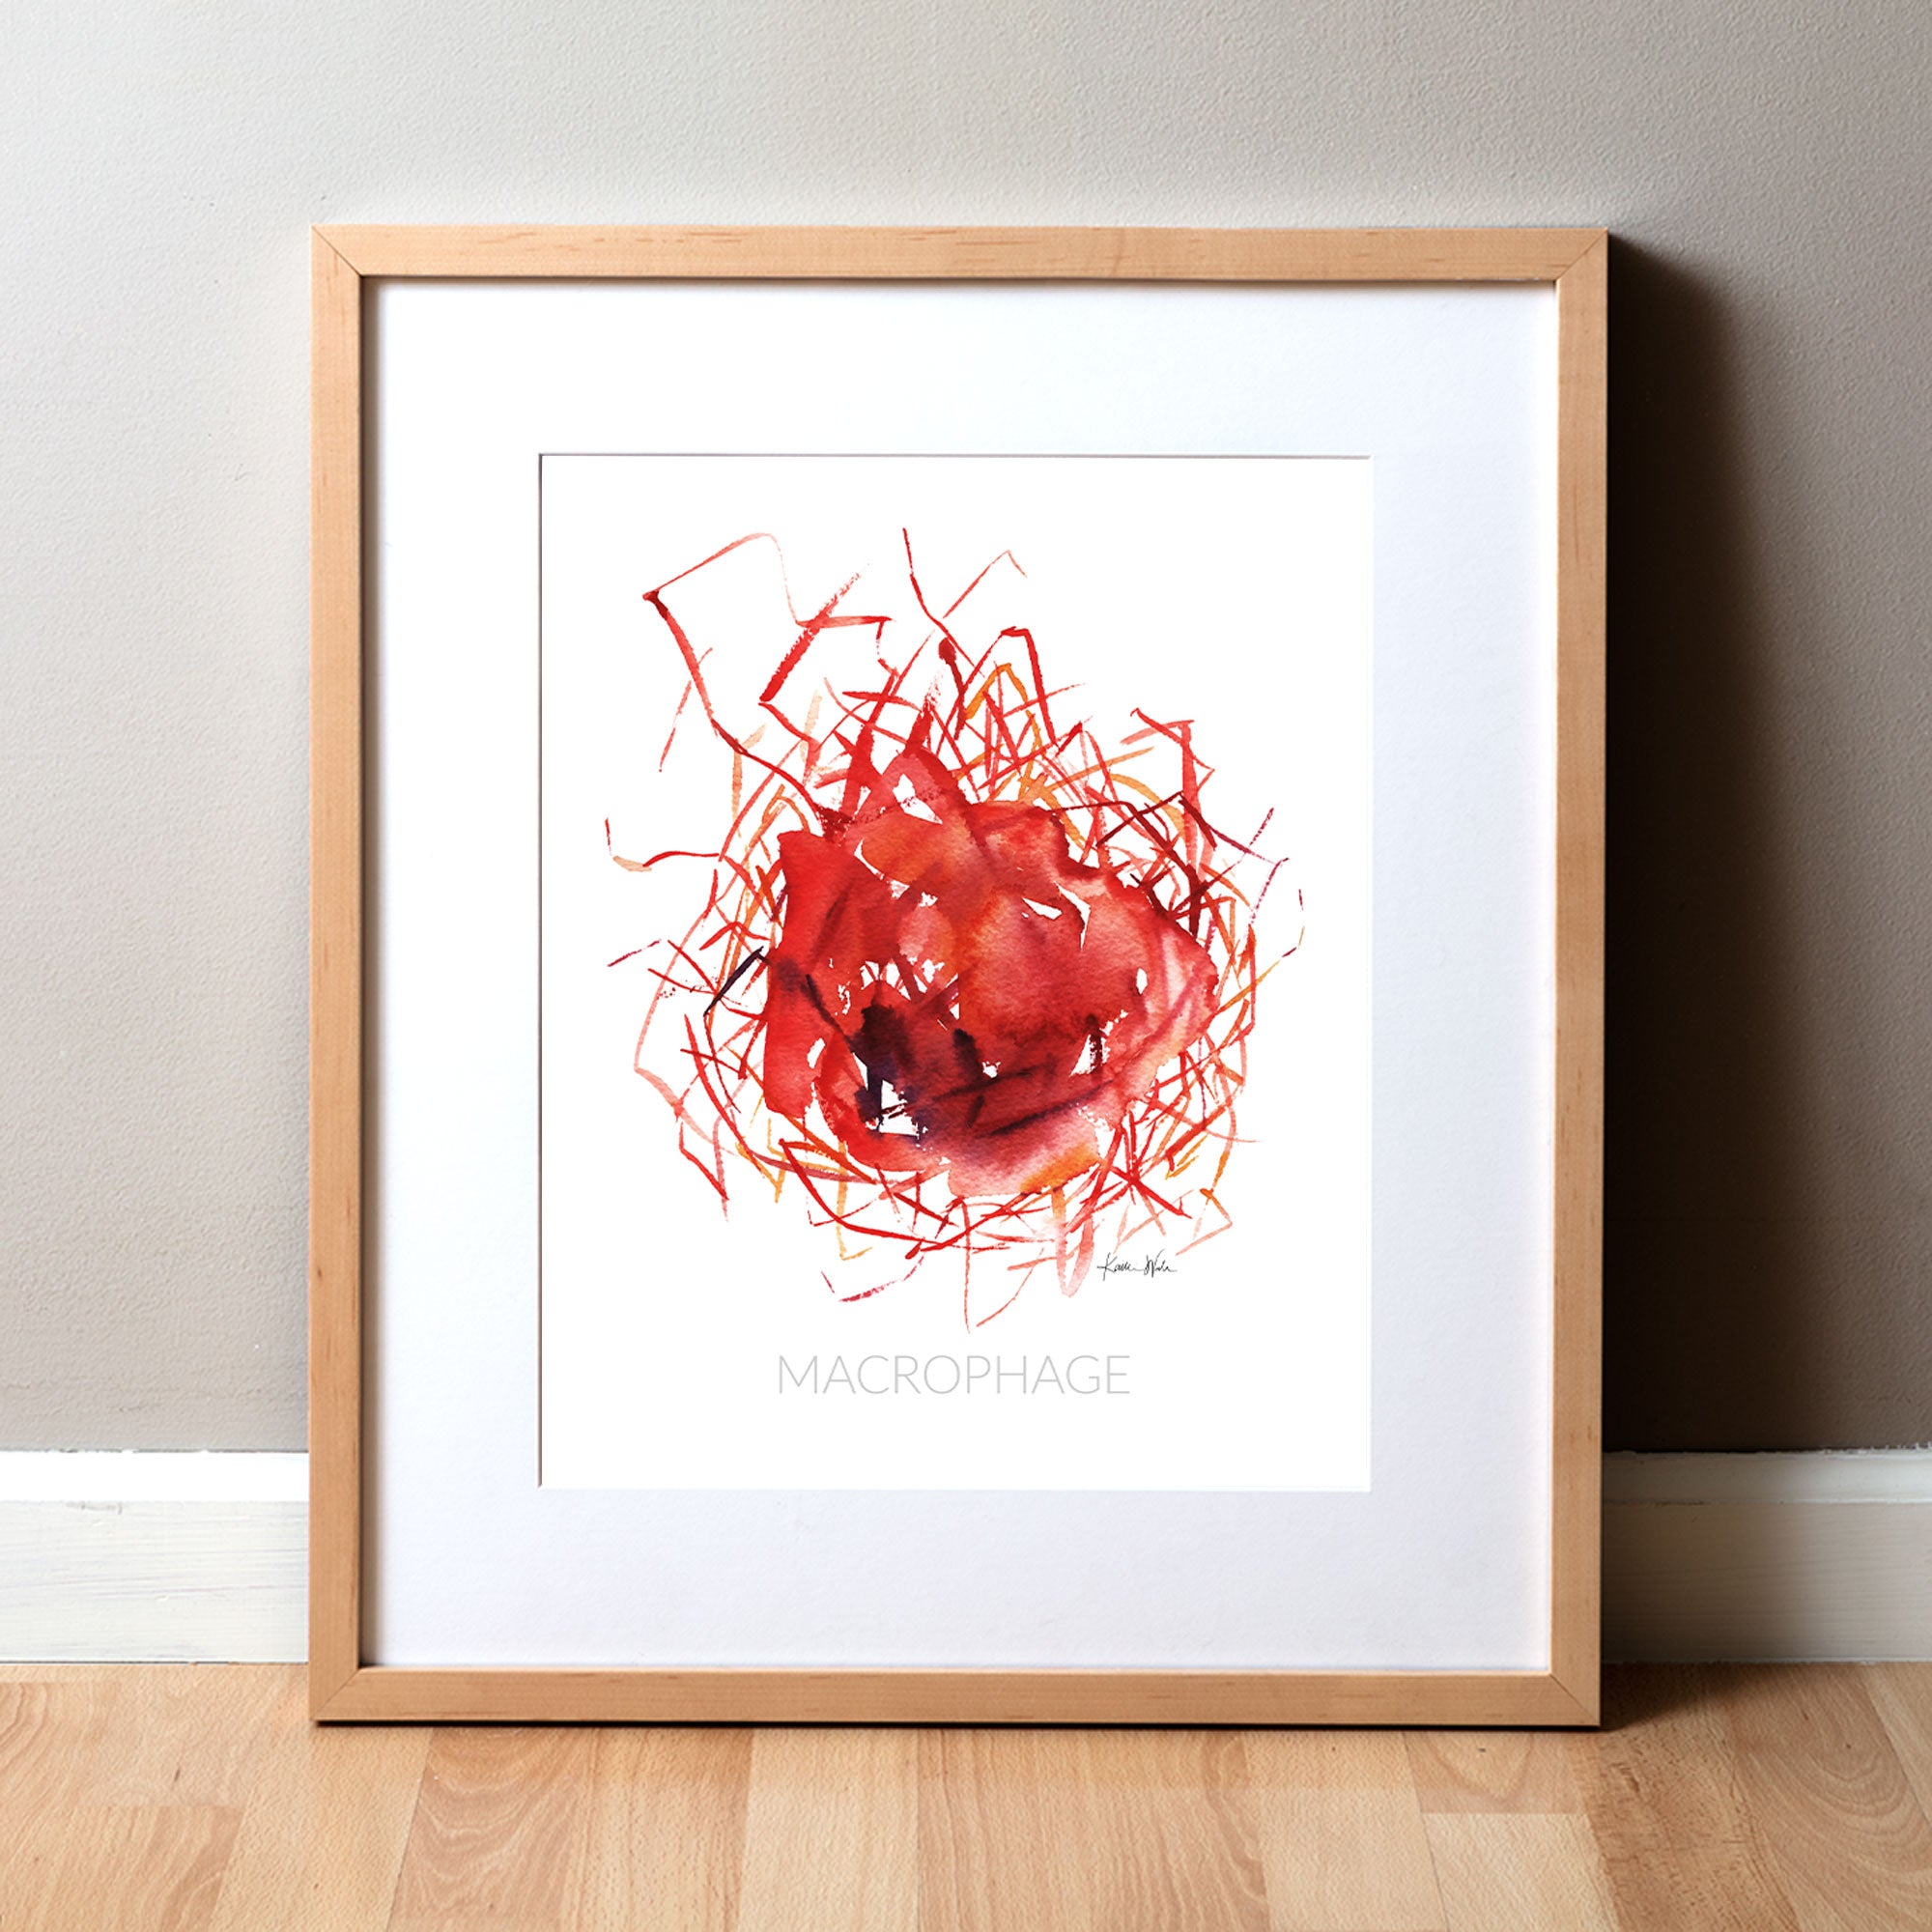 Framed watercolor painting of a macrophage cell.